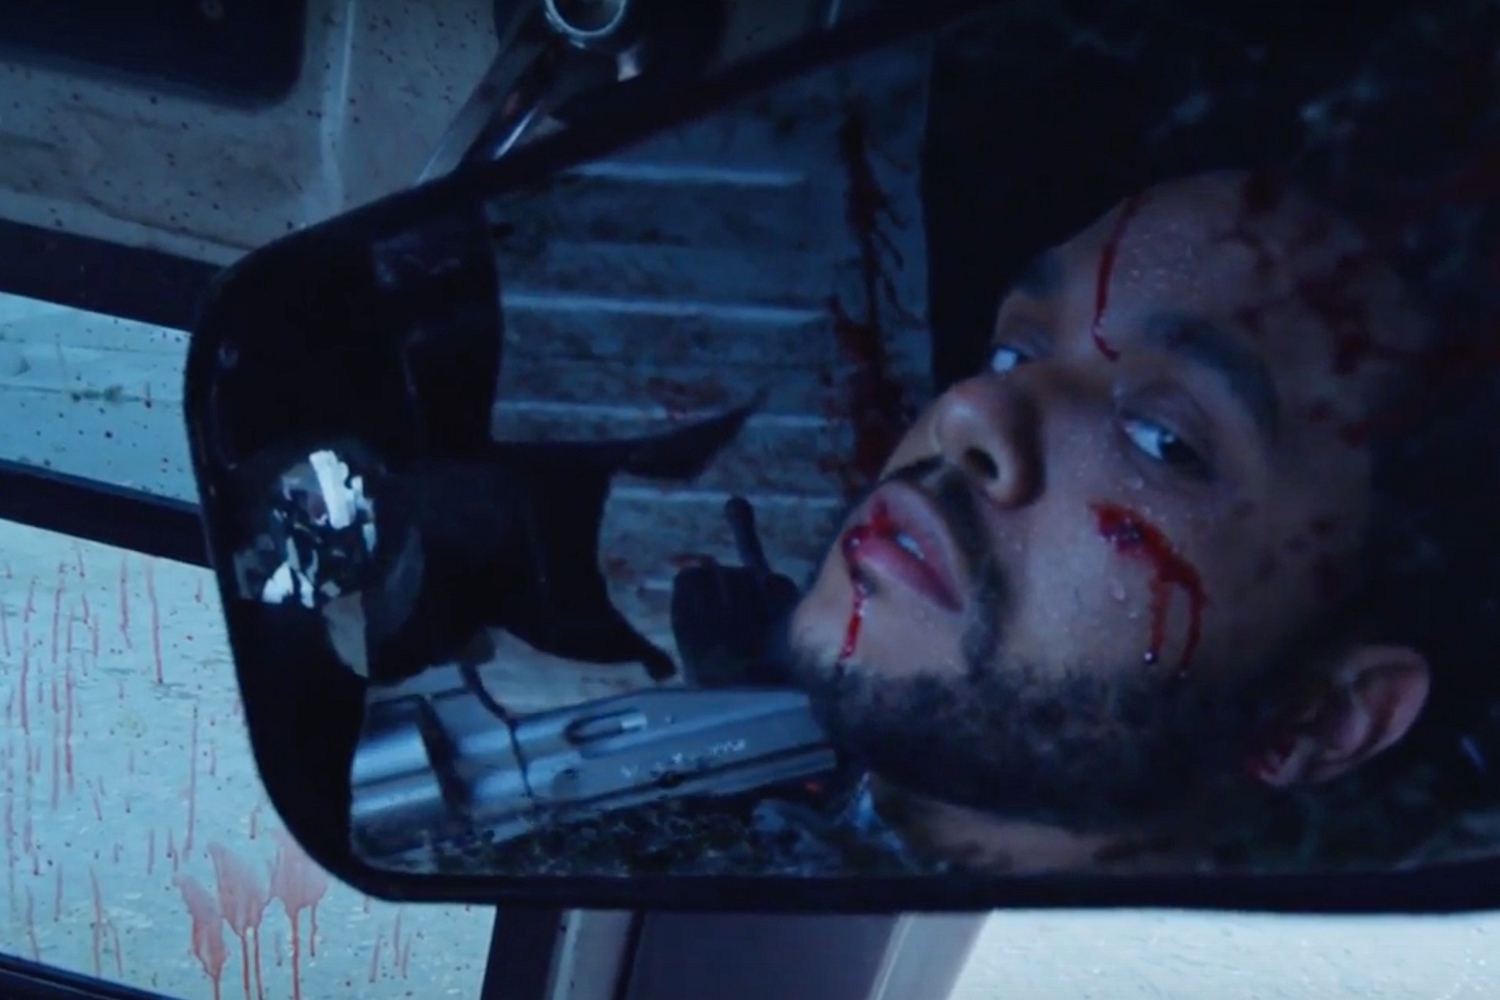 Christ on a fucking bike The Weeknd’s ‘False Alarm’ video is a bit much